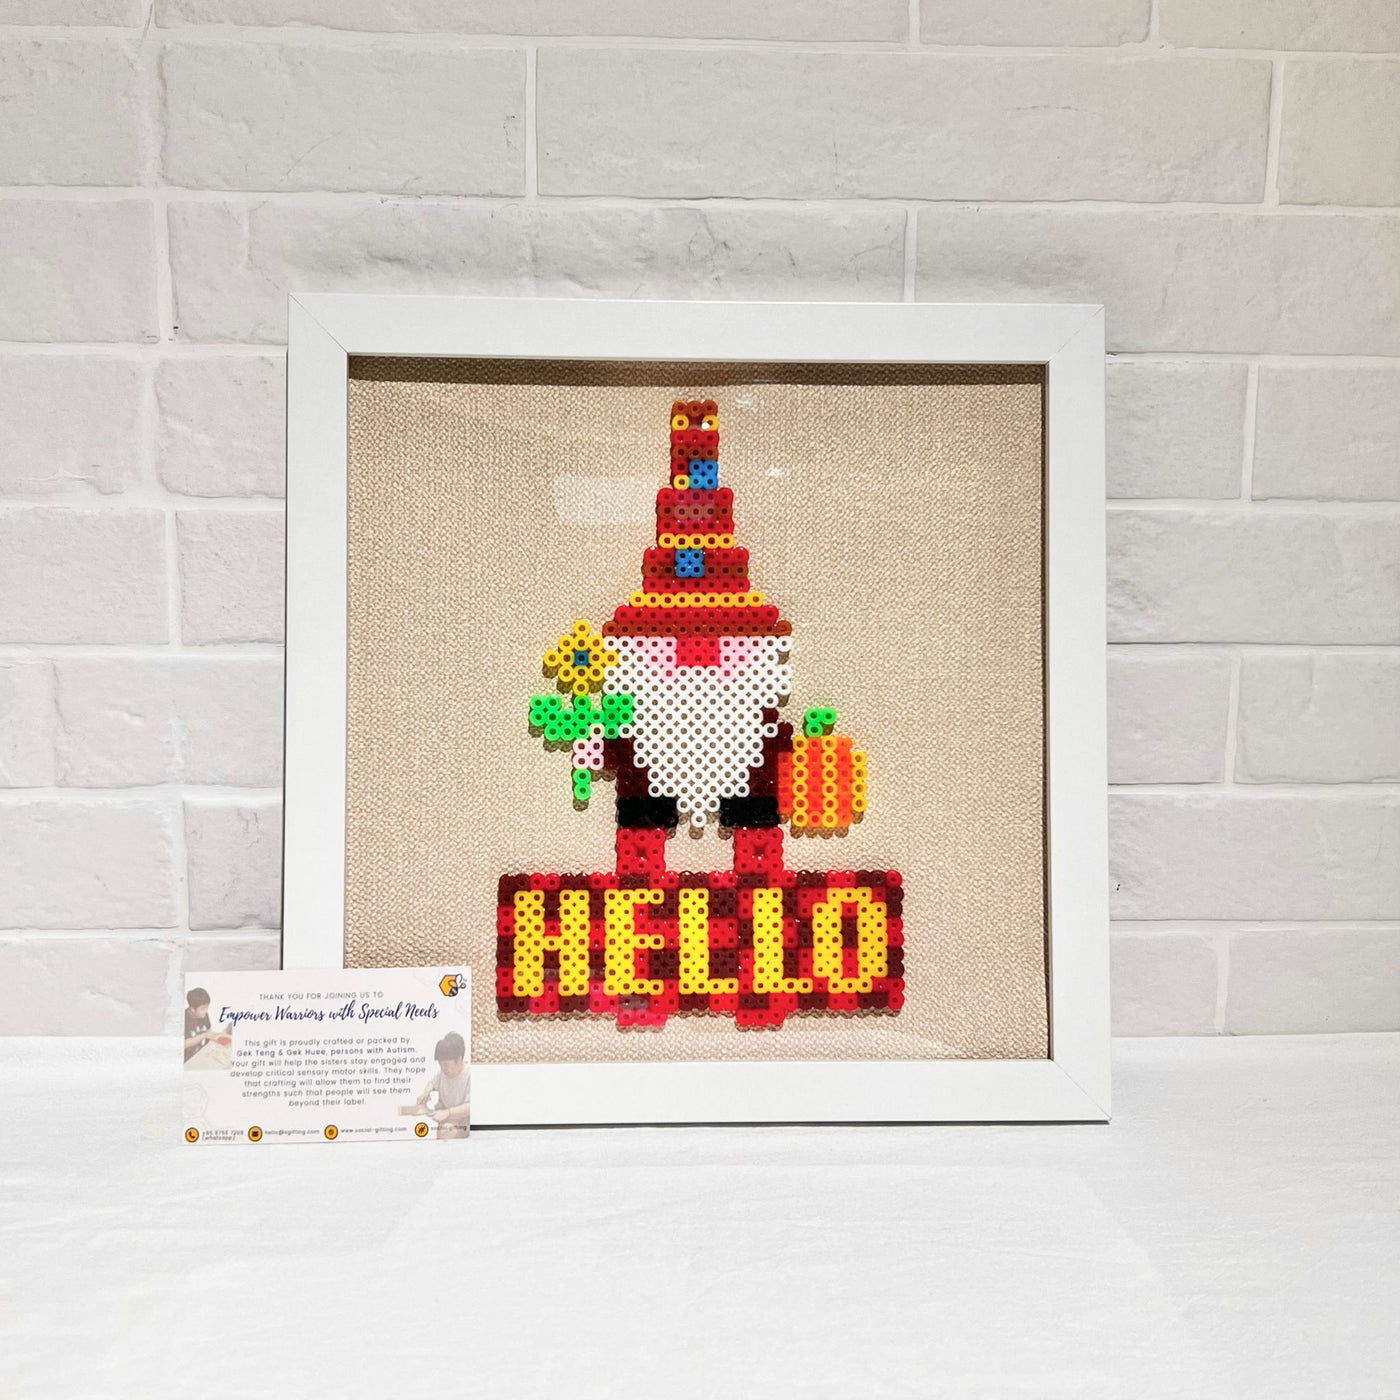 Halloween-Themed Dwarf Hama Beads with Wooden Frame